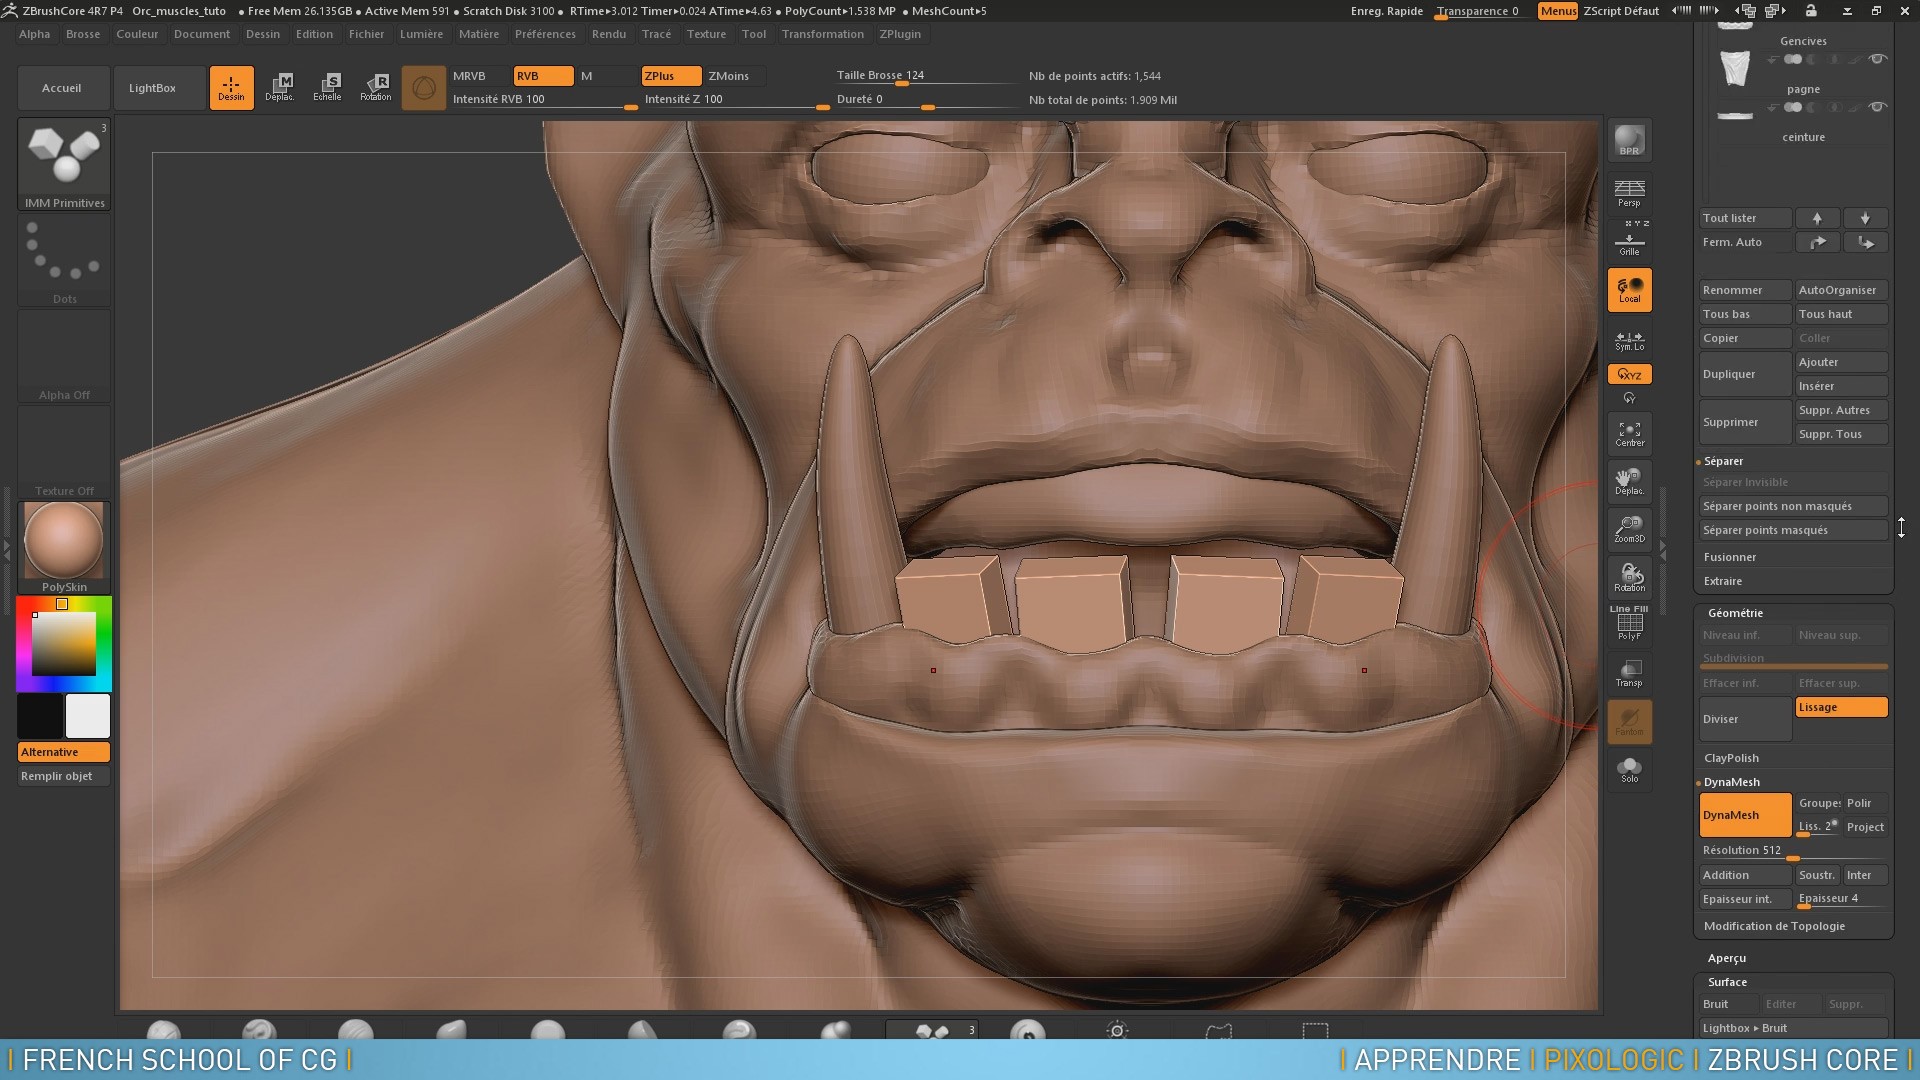 zbrush core does not have a curve tube